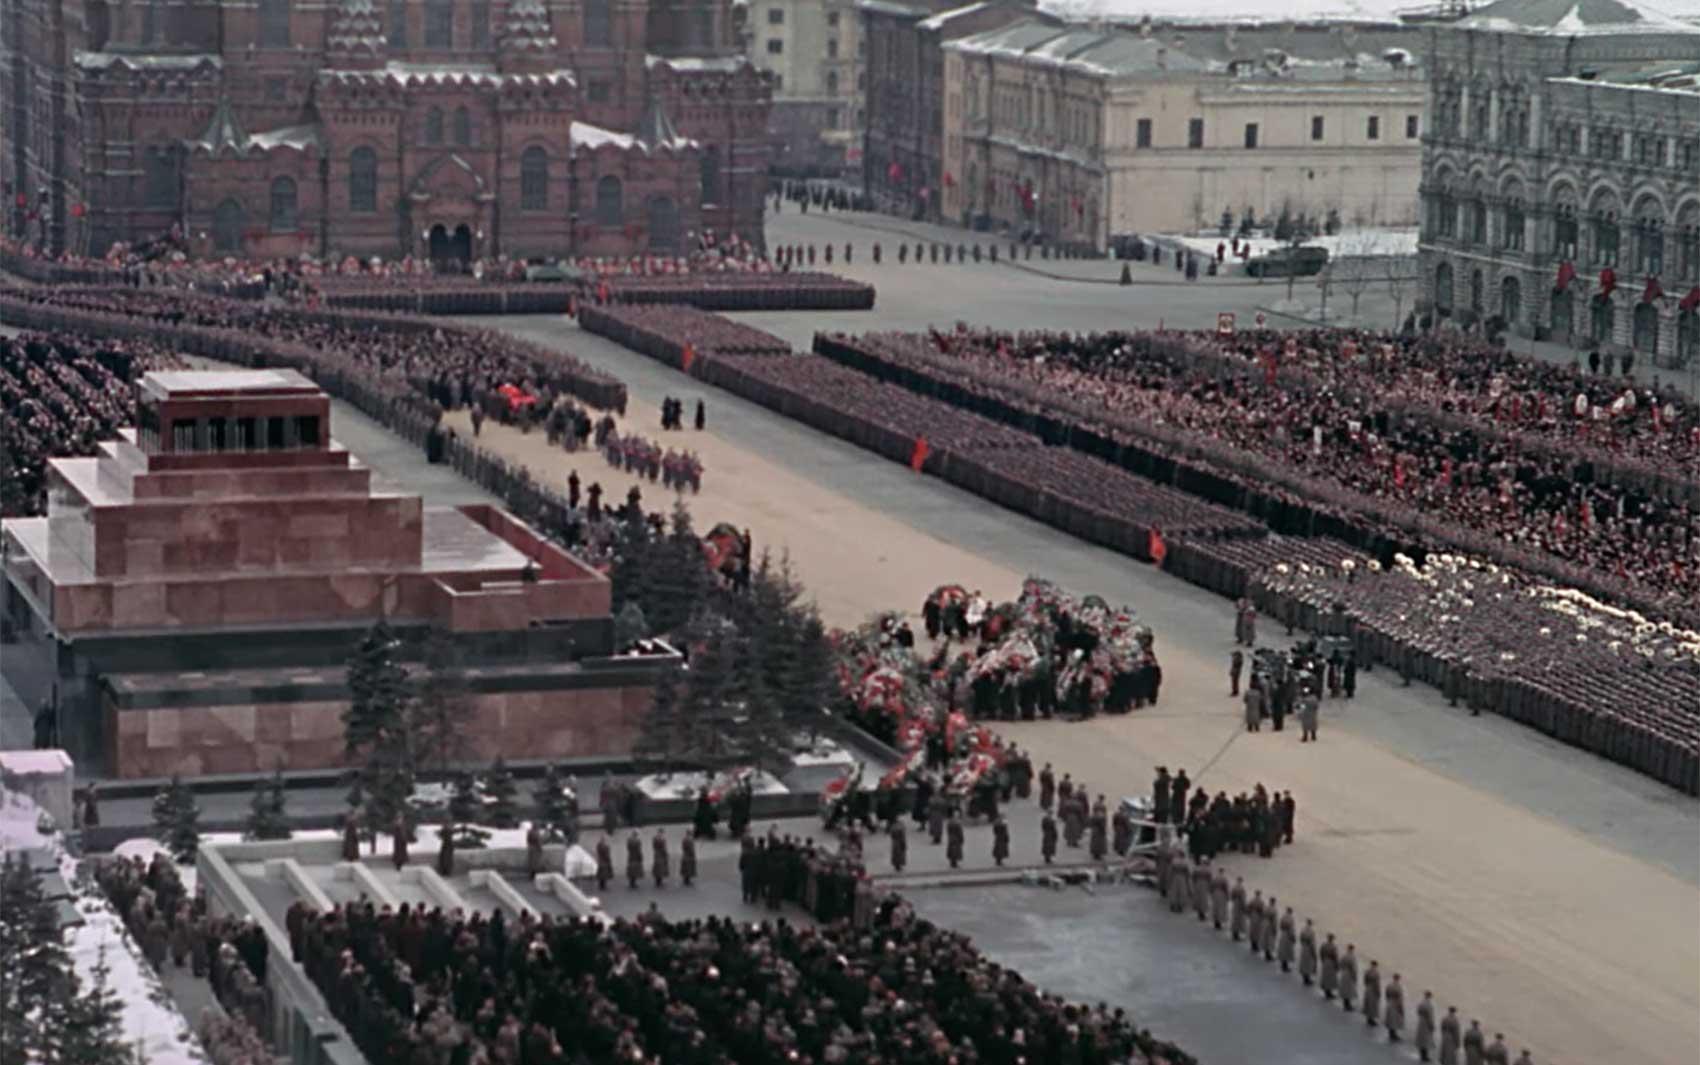 Scene from Stalin's funeral showing mausoleum on Red Square